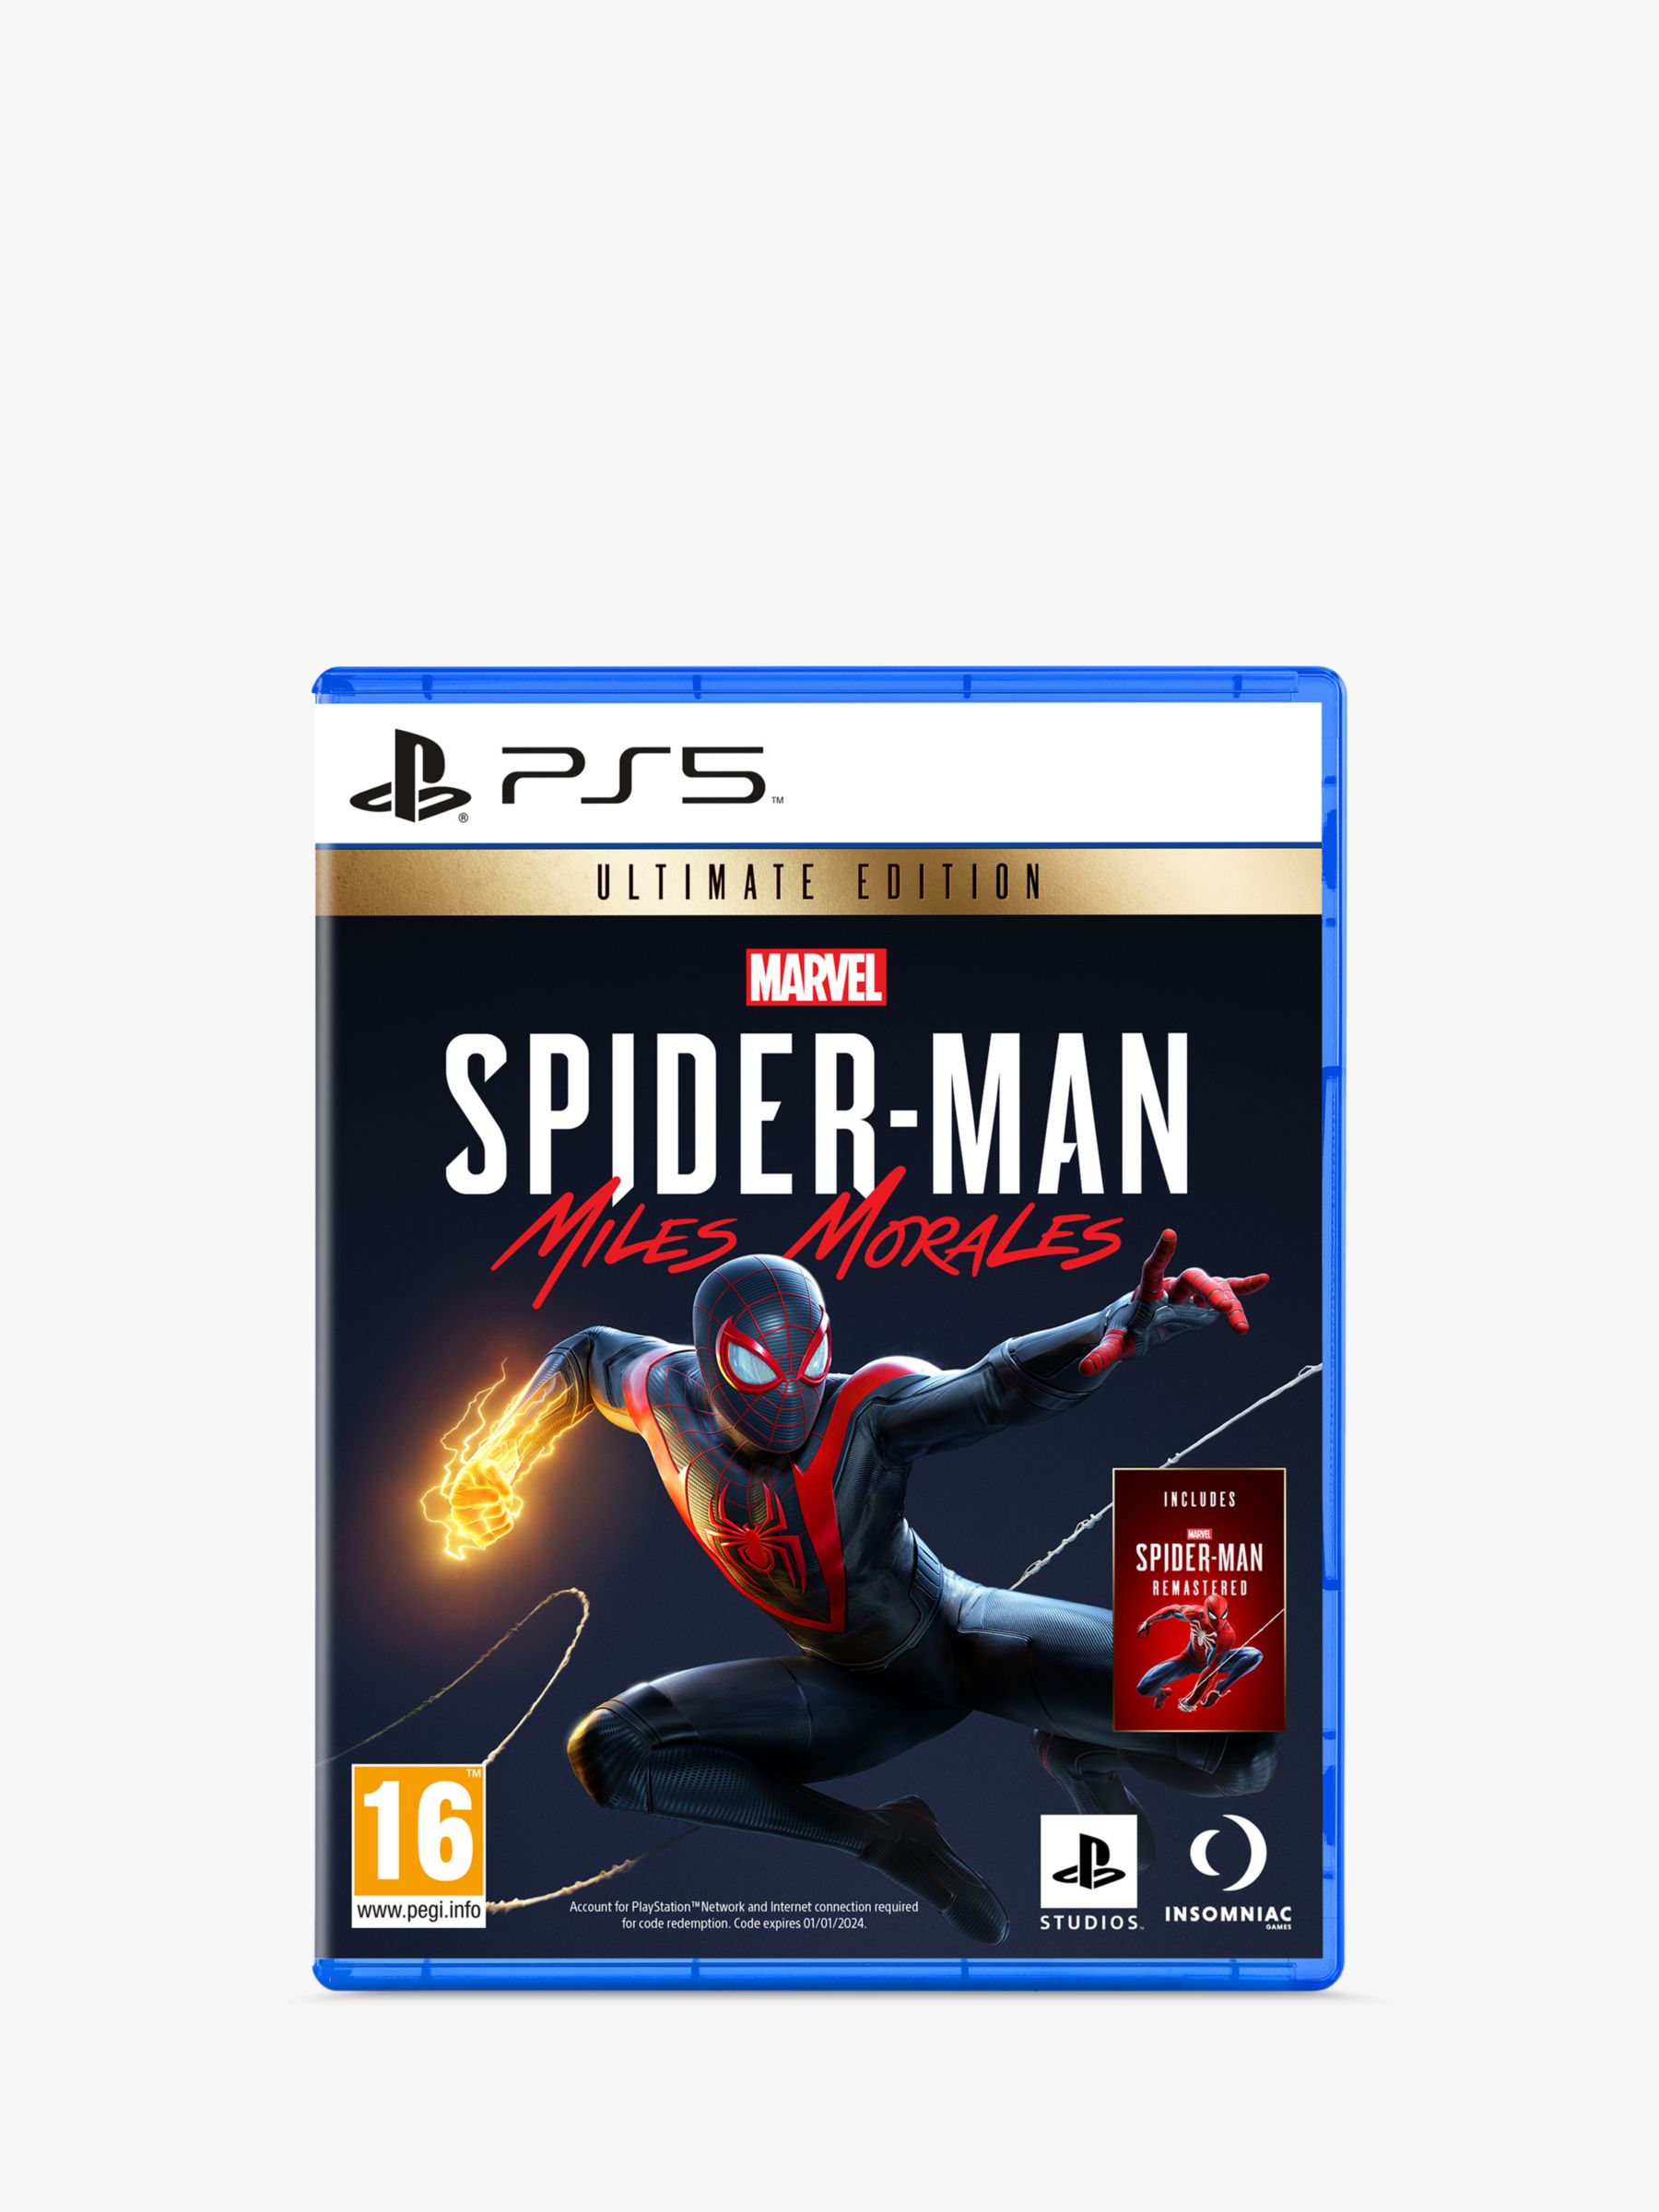 Save on Marvel's Spider-Man: Miles Morales Ultimate Edition for